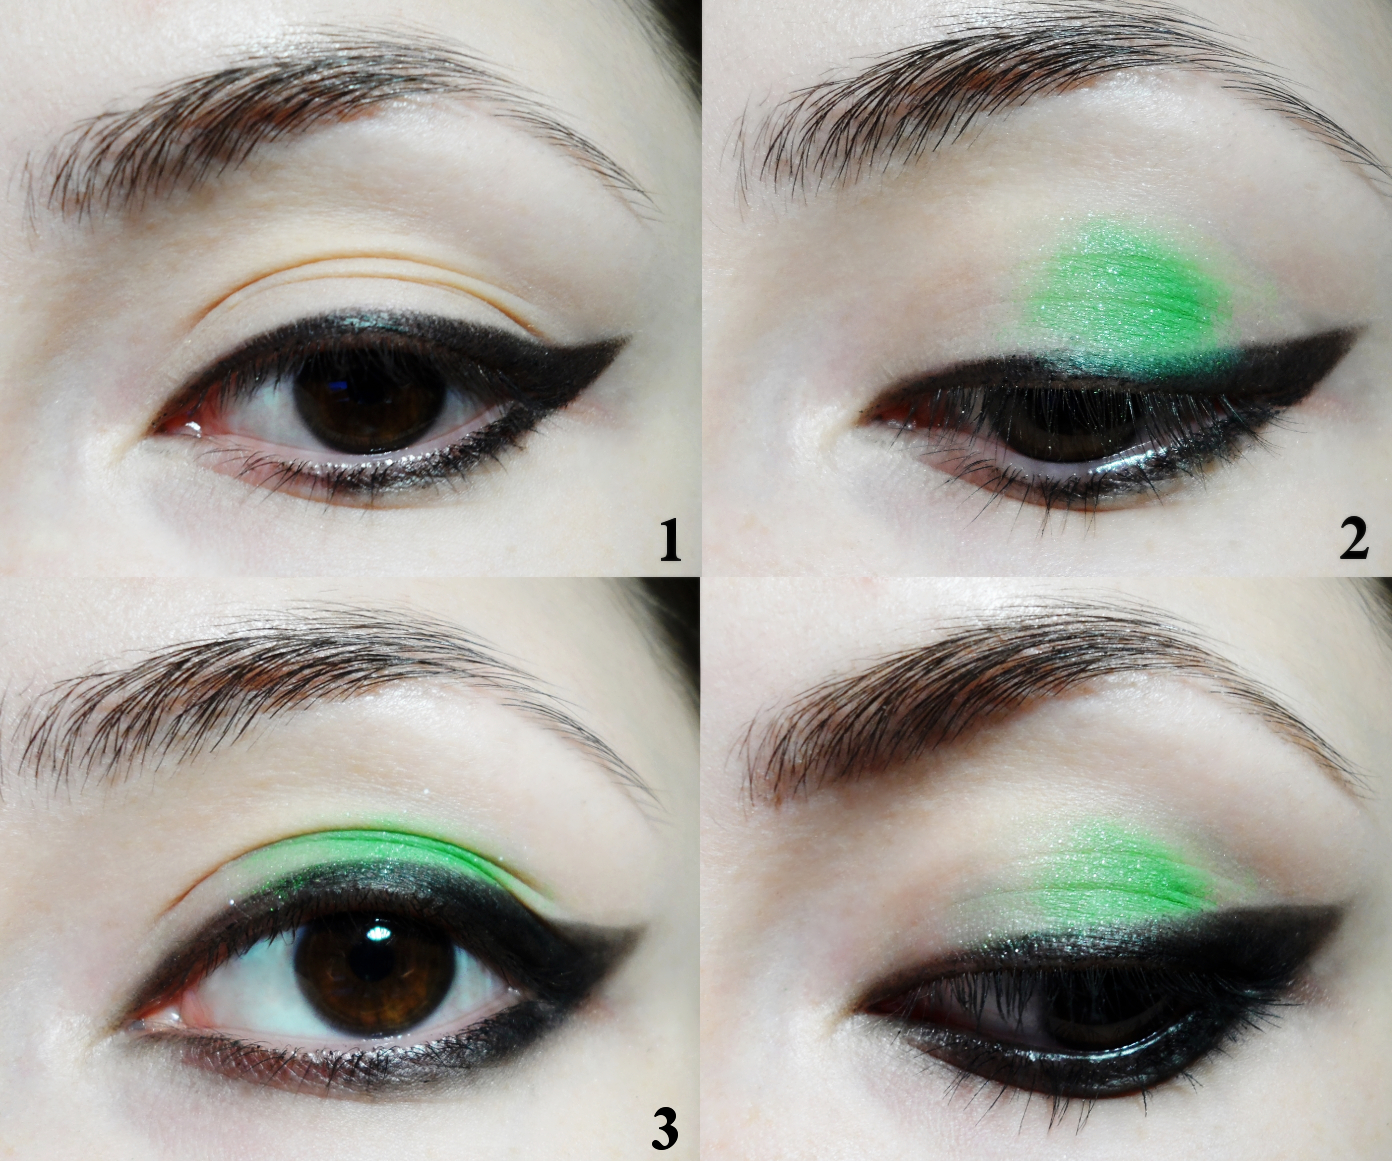 a step-by-step makeup pictorial showing how to apply Avril Lavigne's eye makeup look from video Smile with instructions